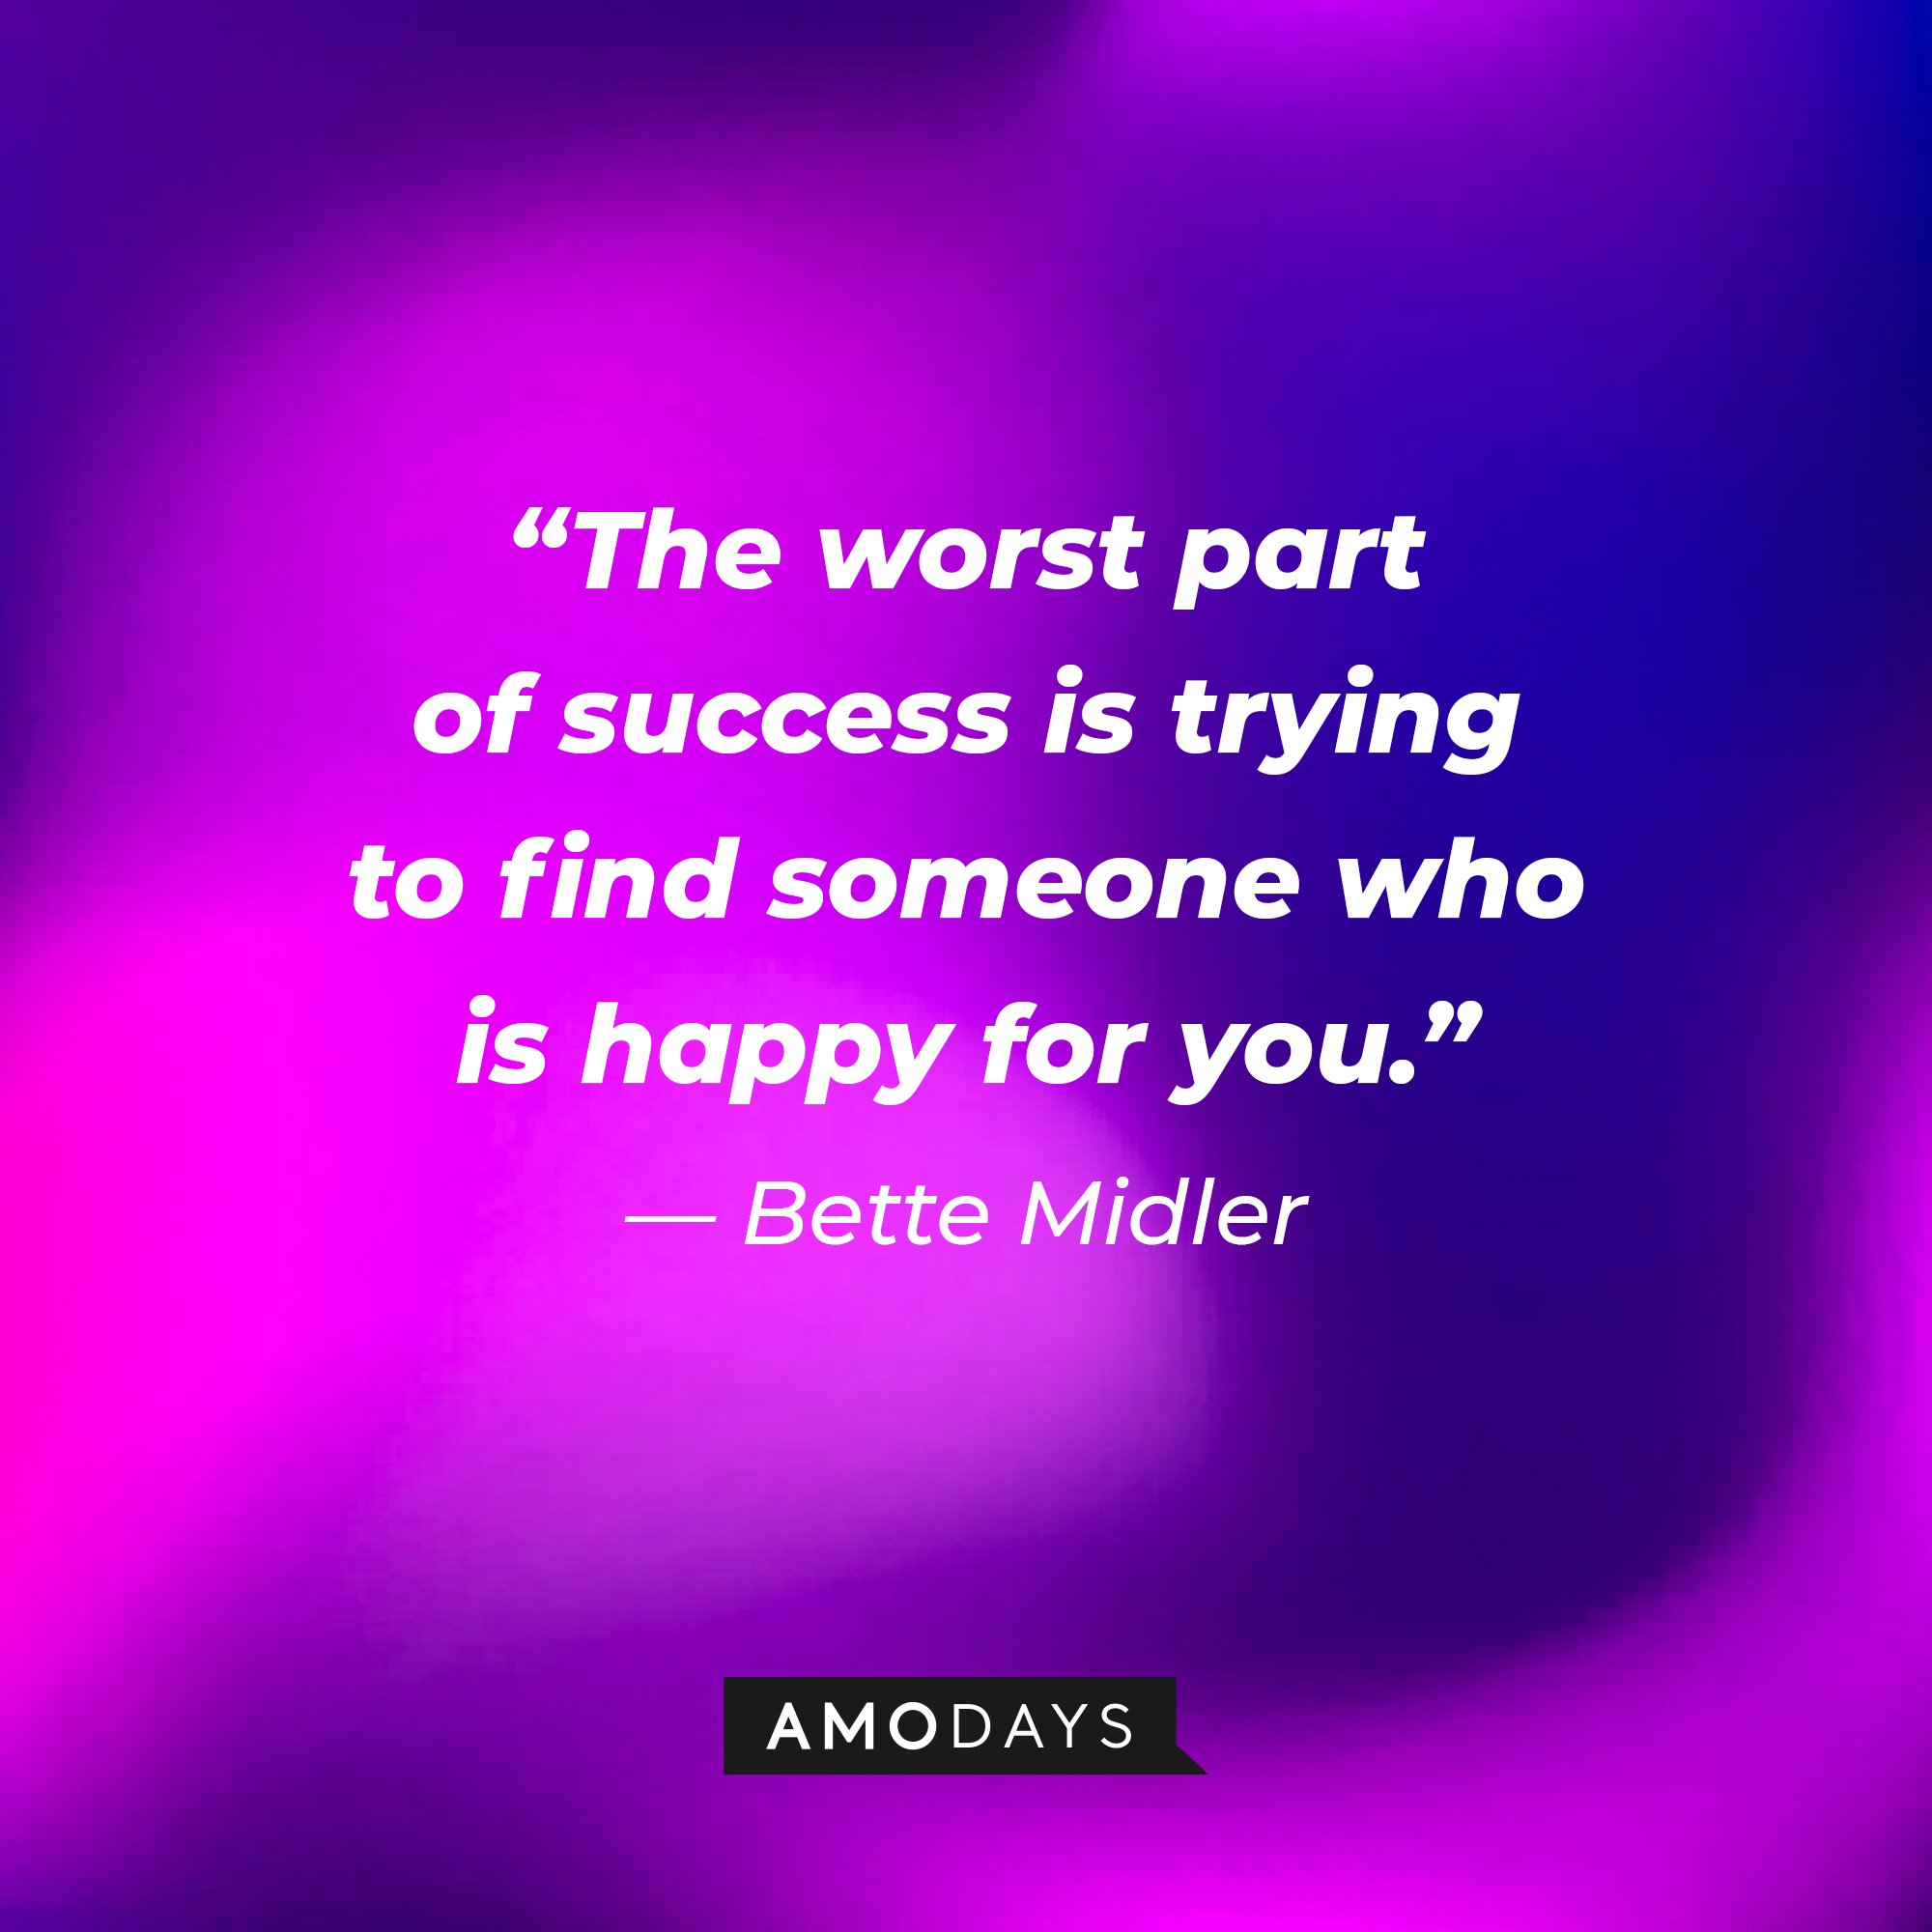 Bette Midler's quote: “The worst part of success is trying to find someone who is happy for you.” | Image: AmoDays